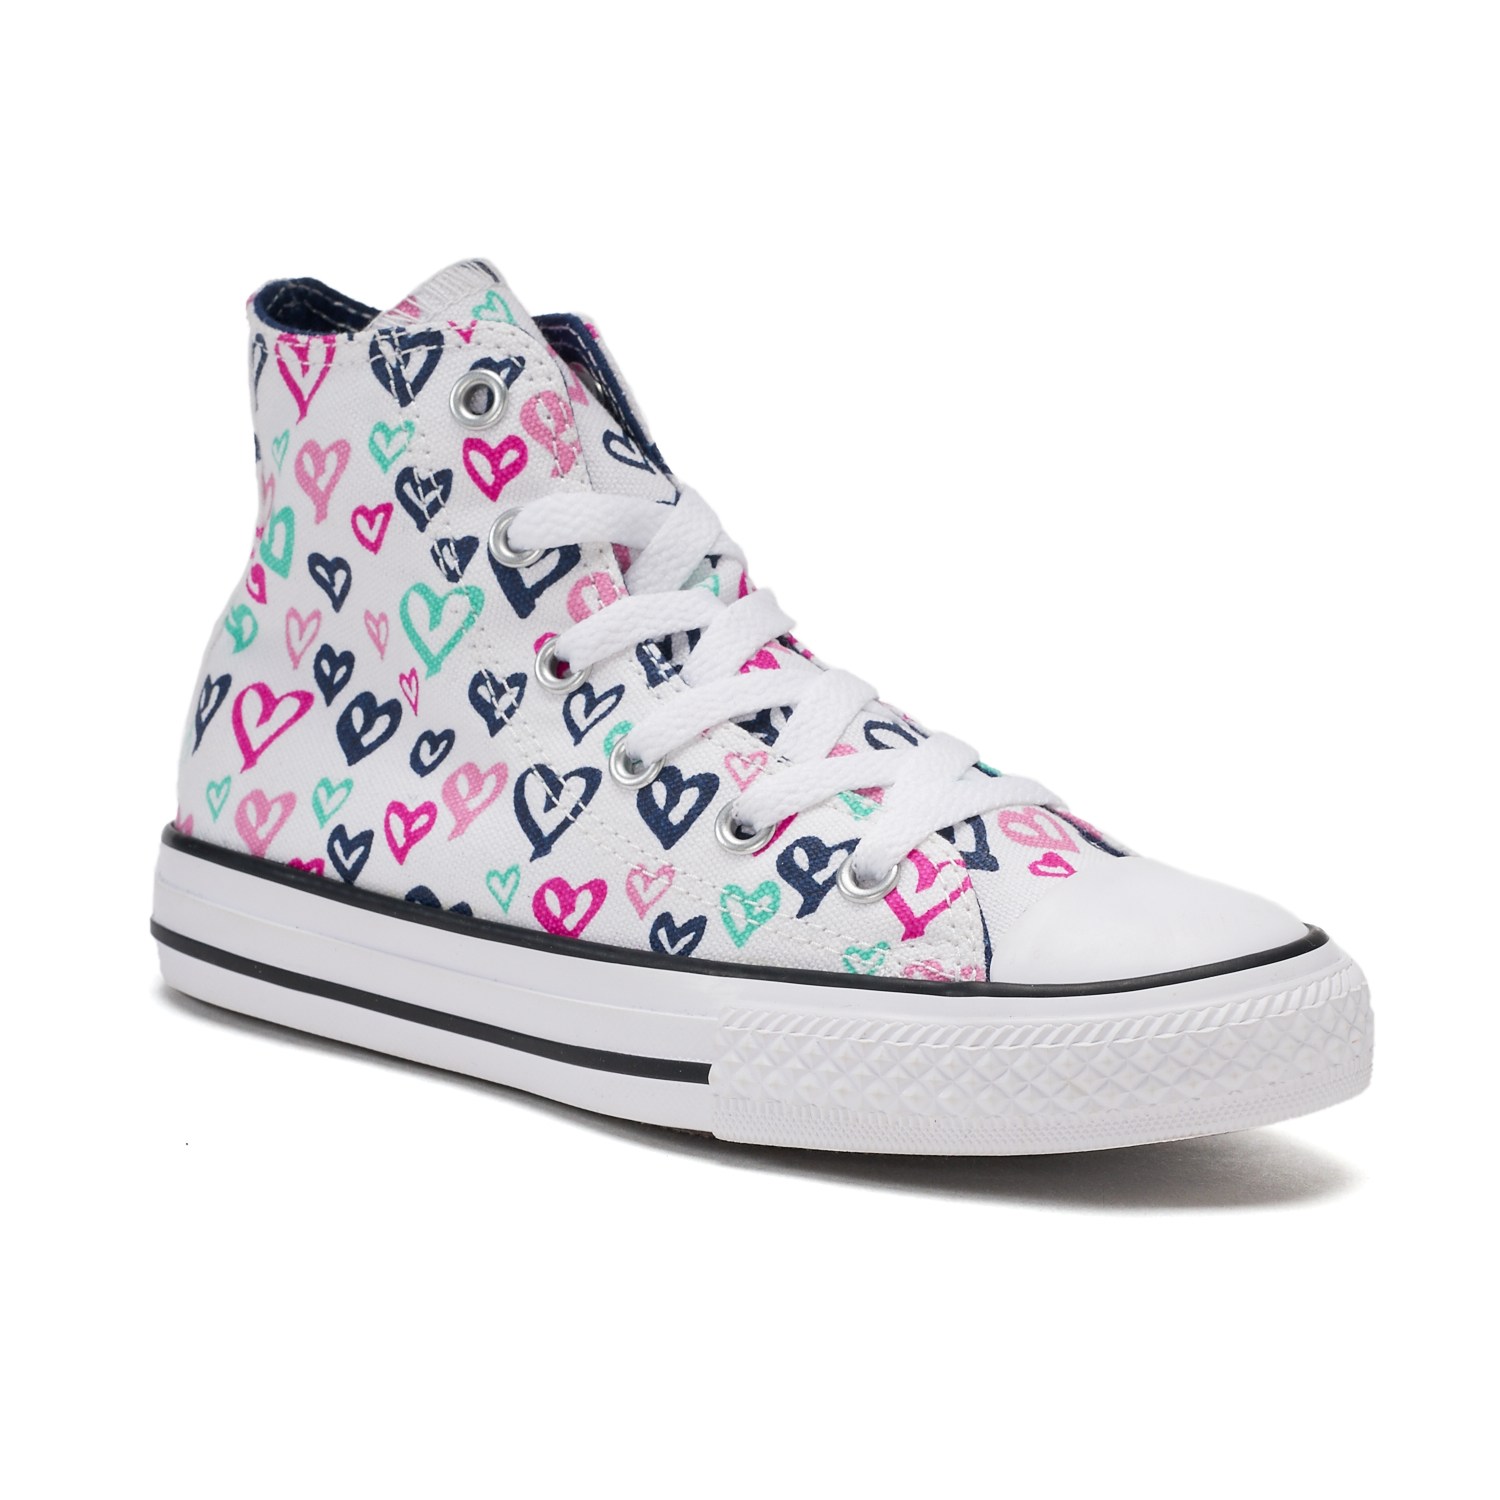 Converse for Girls – Shoes are Designed Just for Them!